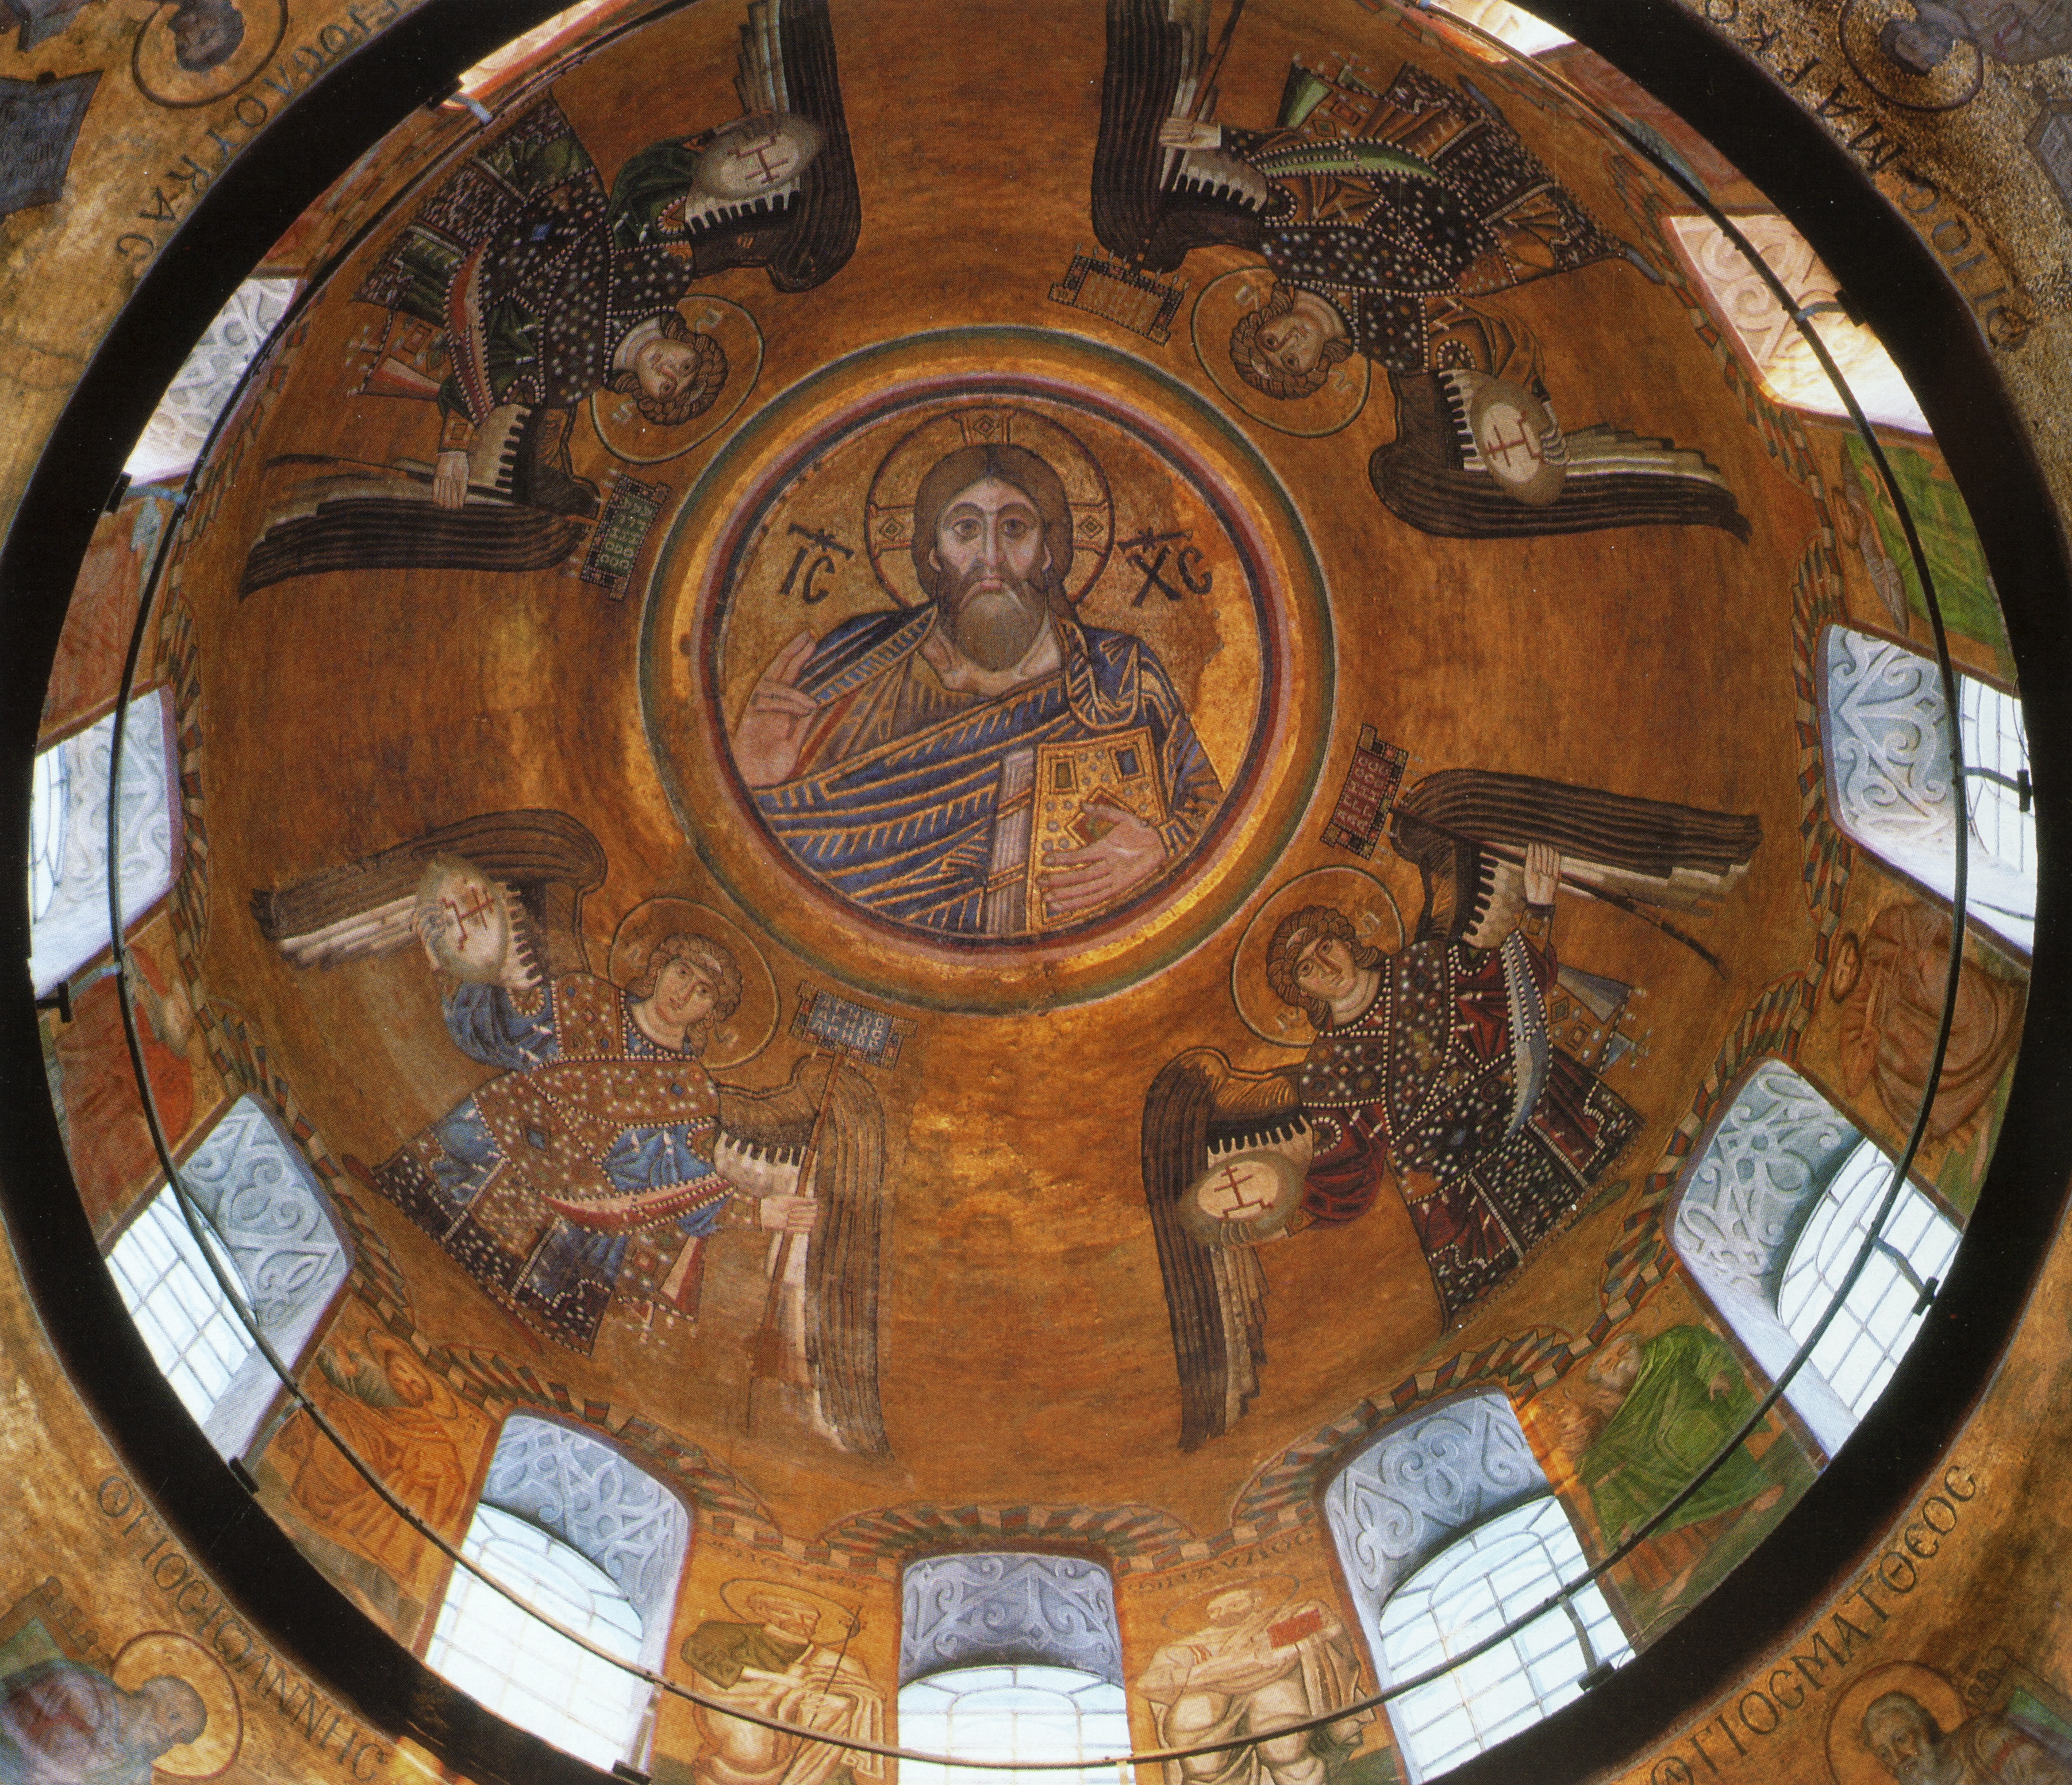 View of the mosaics in the dome